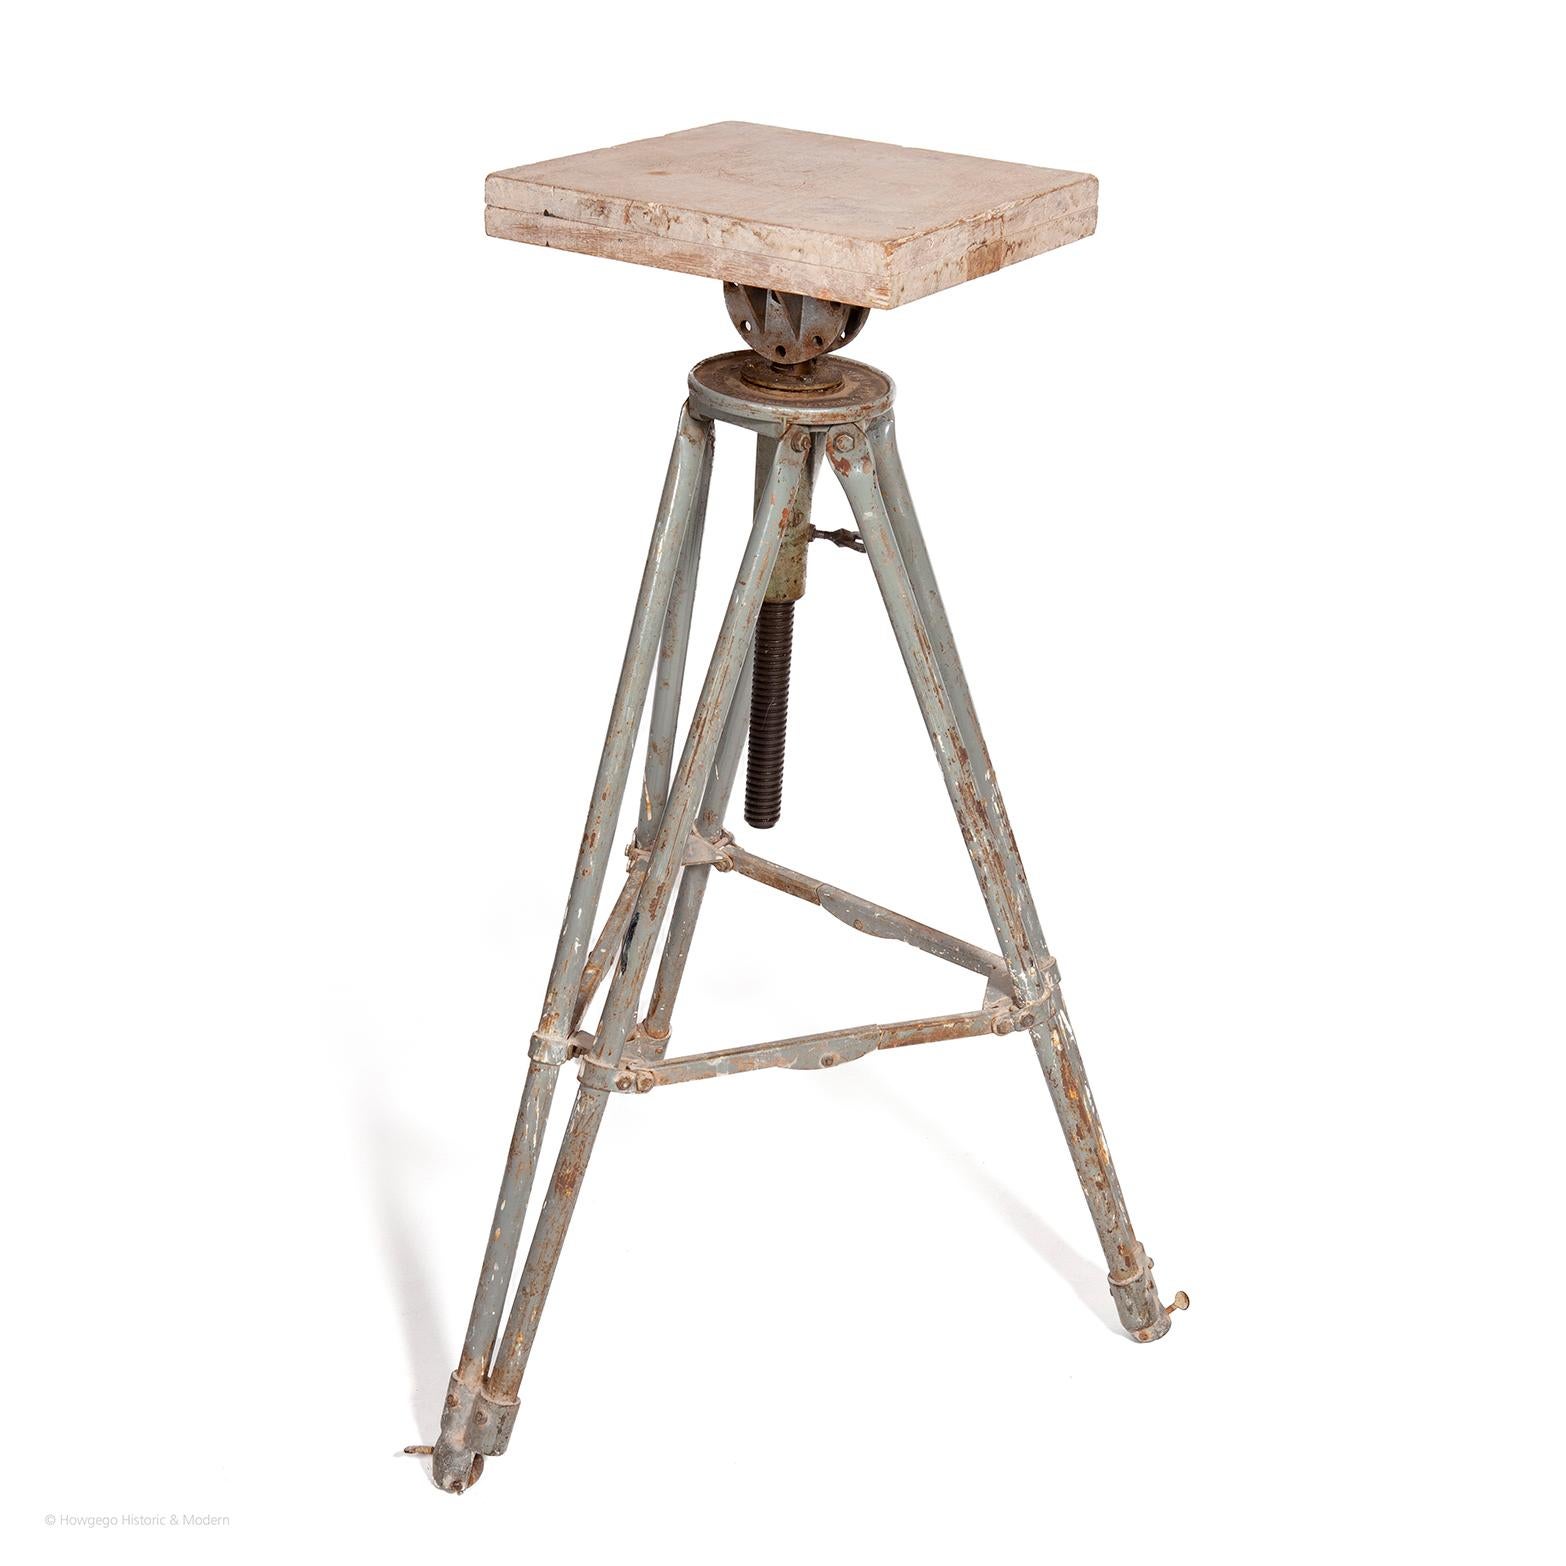 - This sculptor's modelling stand is usable and in working order
- It also creates an atmospheric aesthetic as a display stand for sculpture, object or lamp. 
- It has been used for decades and accumulated different materials and colours giving it